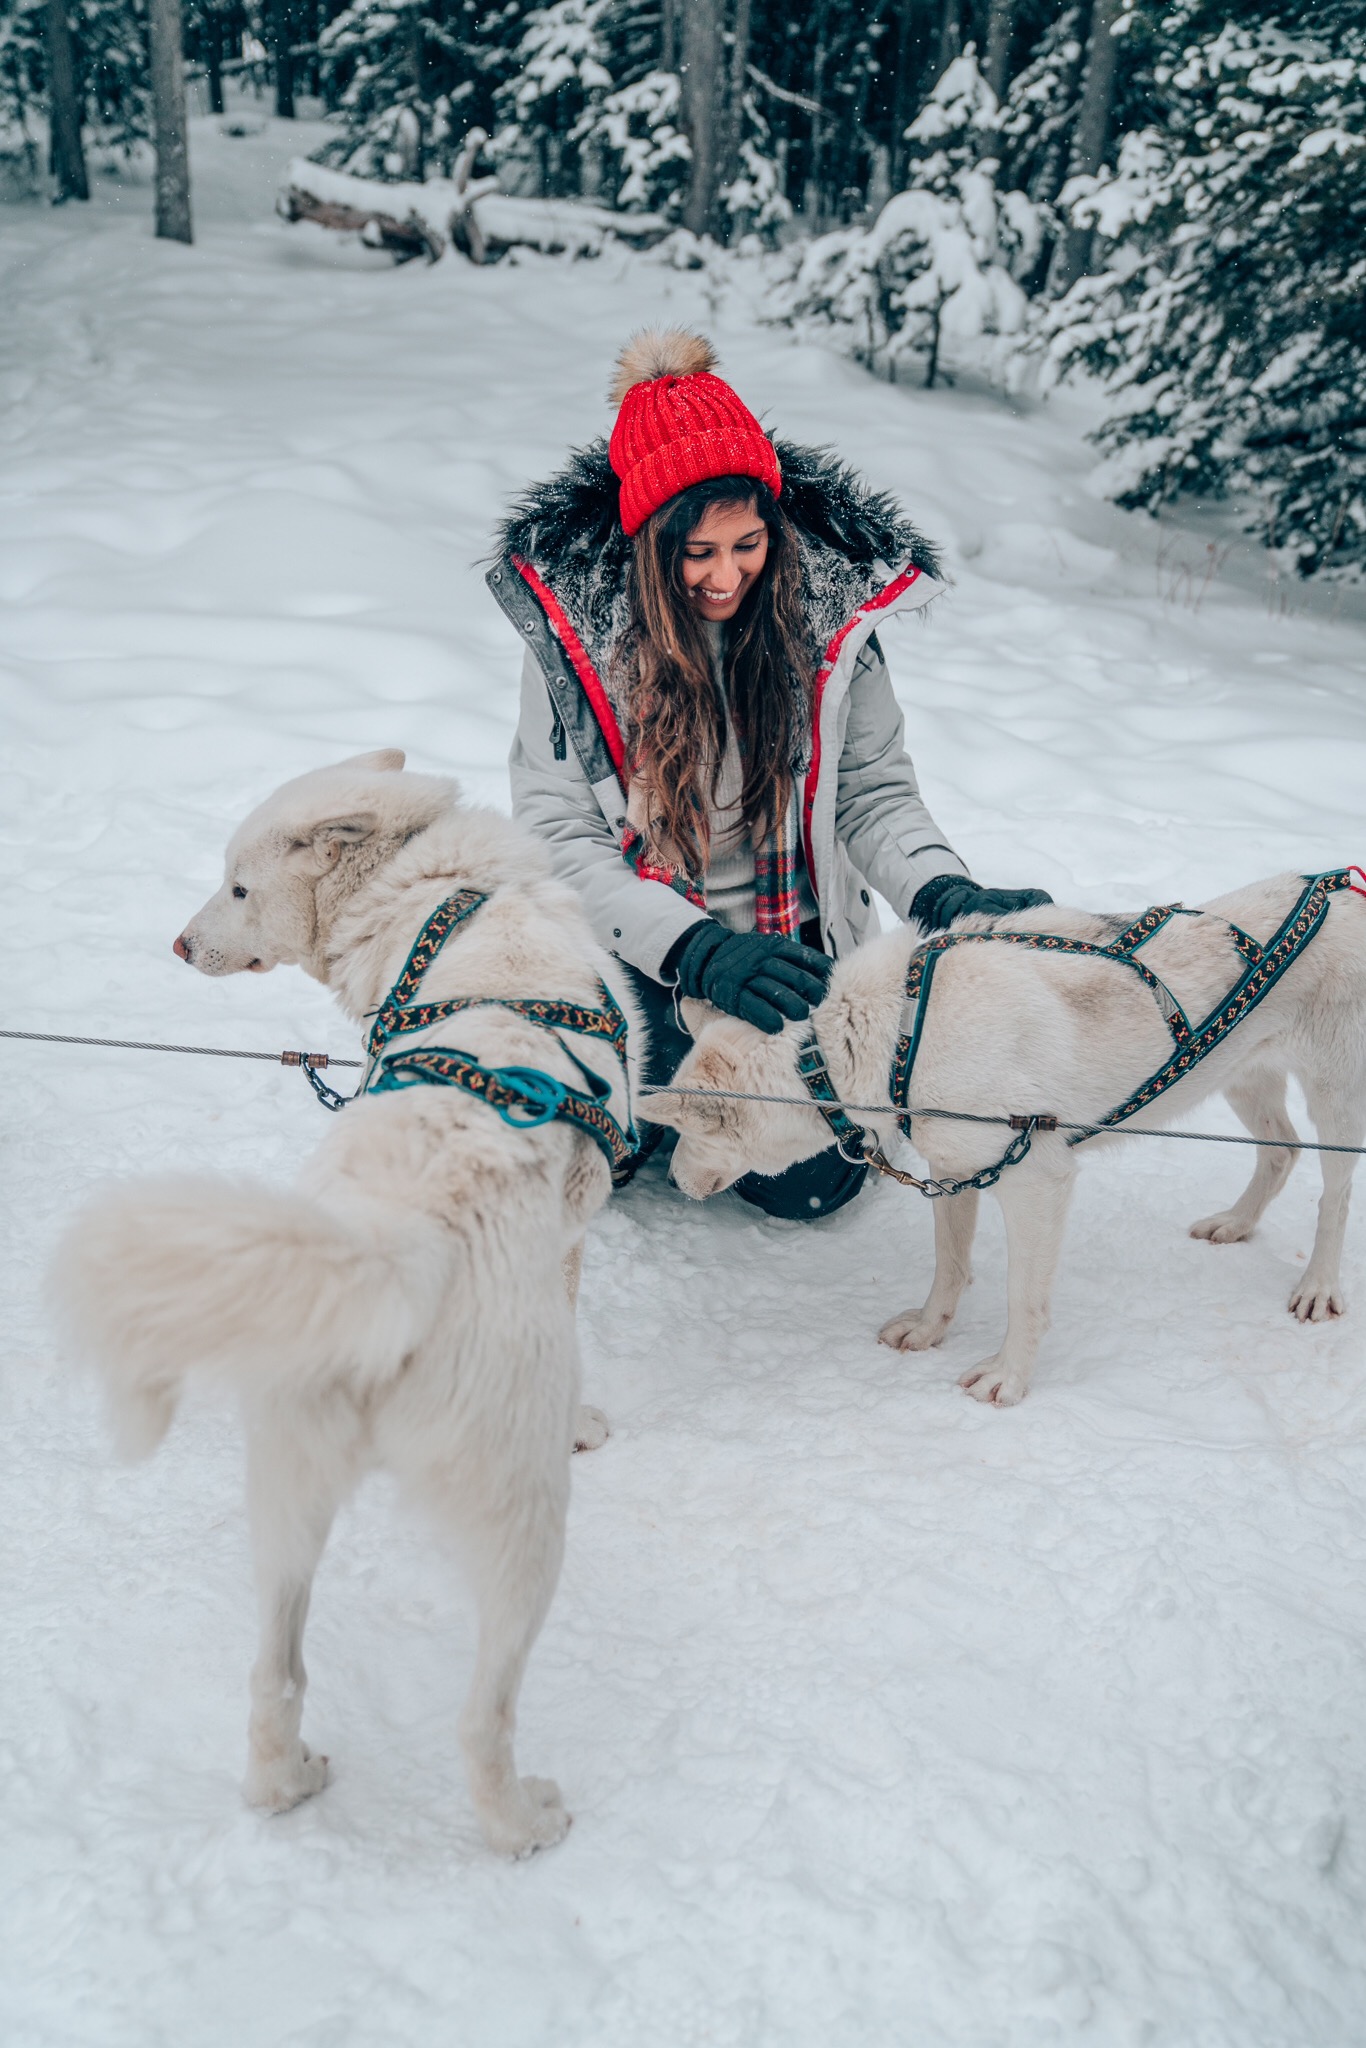 How To Book a Dog Sledding Tour in Banff, Canada